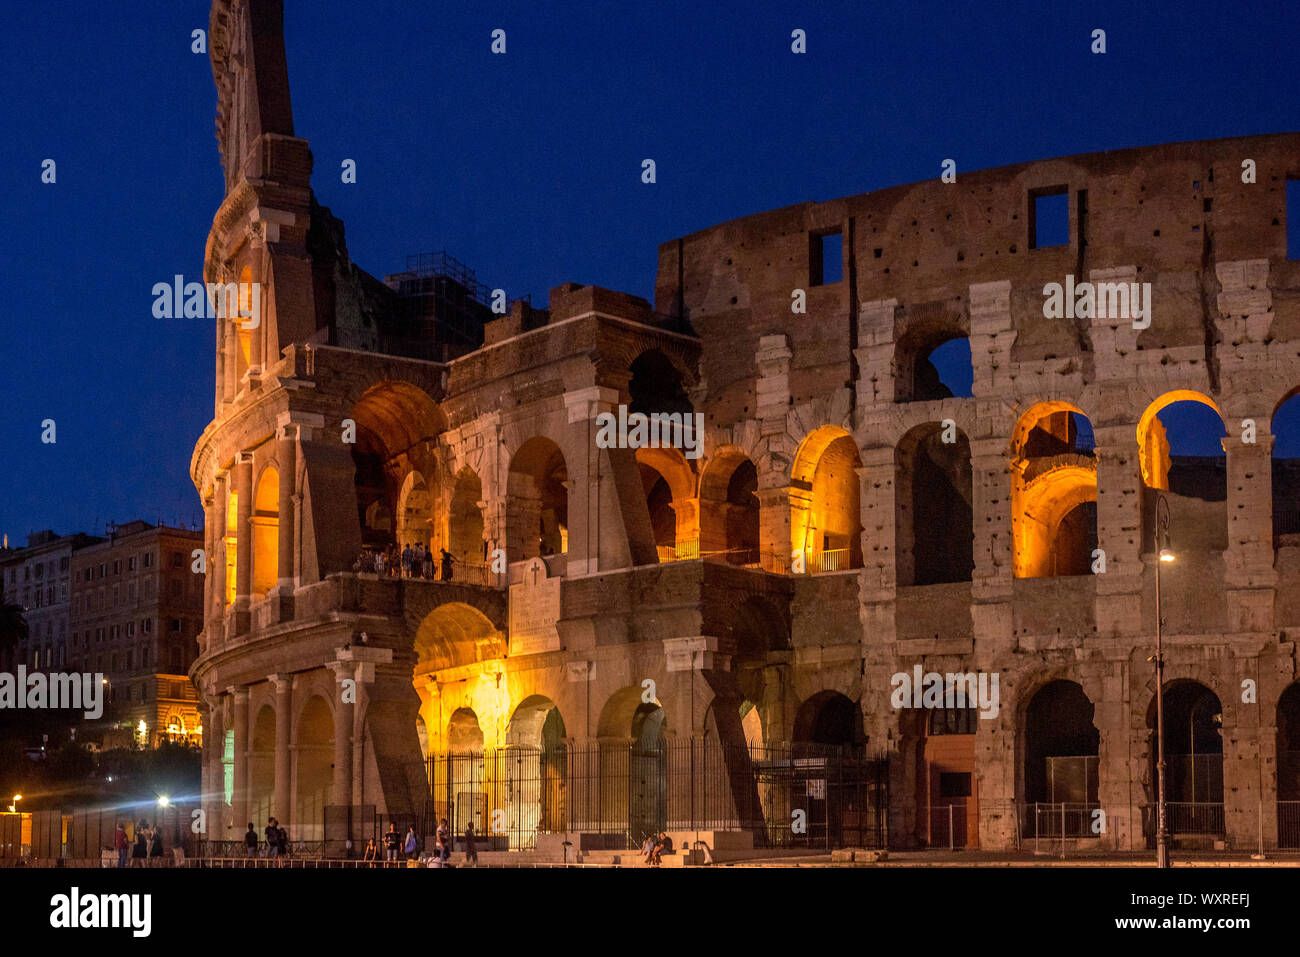 Rome, Italy - July 16, 2019: The Colosseum under the glow of lights at night, Rome Stock Photo